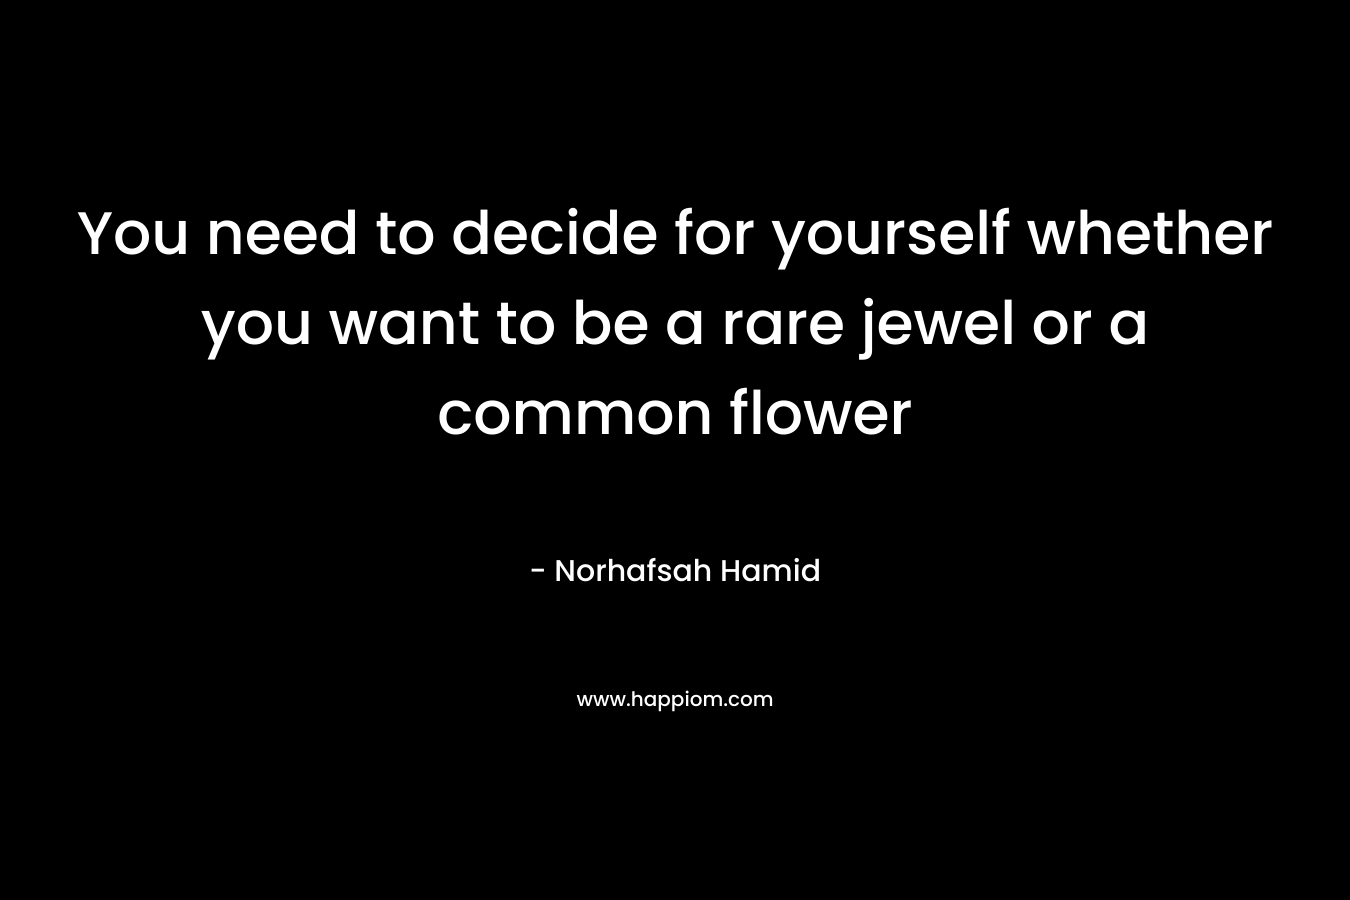 You need to decide for yourself whether you want to be a rare jewel or a common flower – Norhafsah Hamid